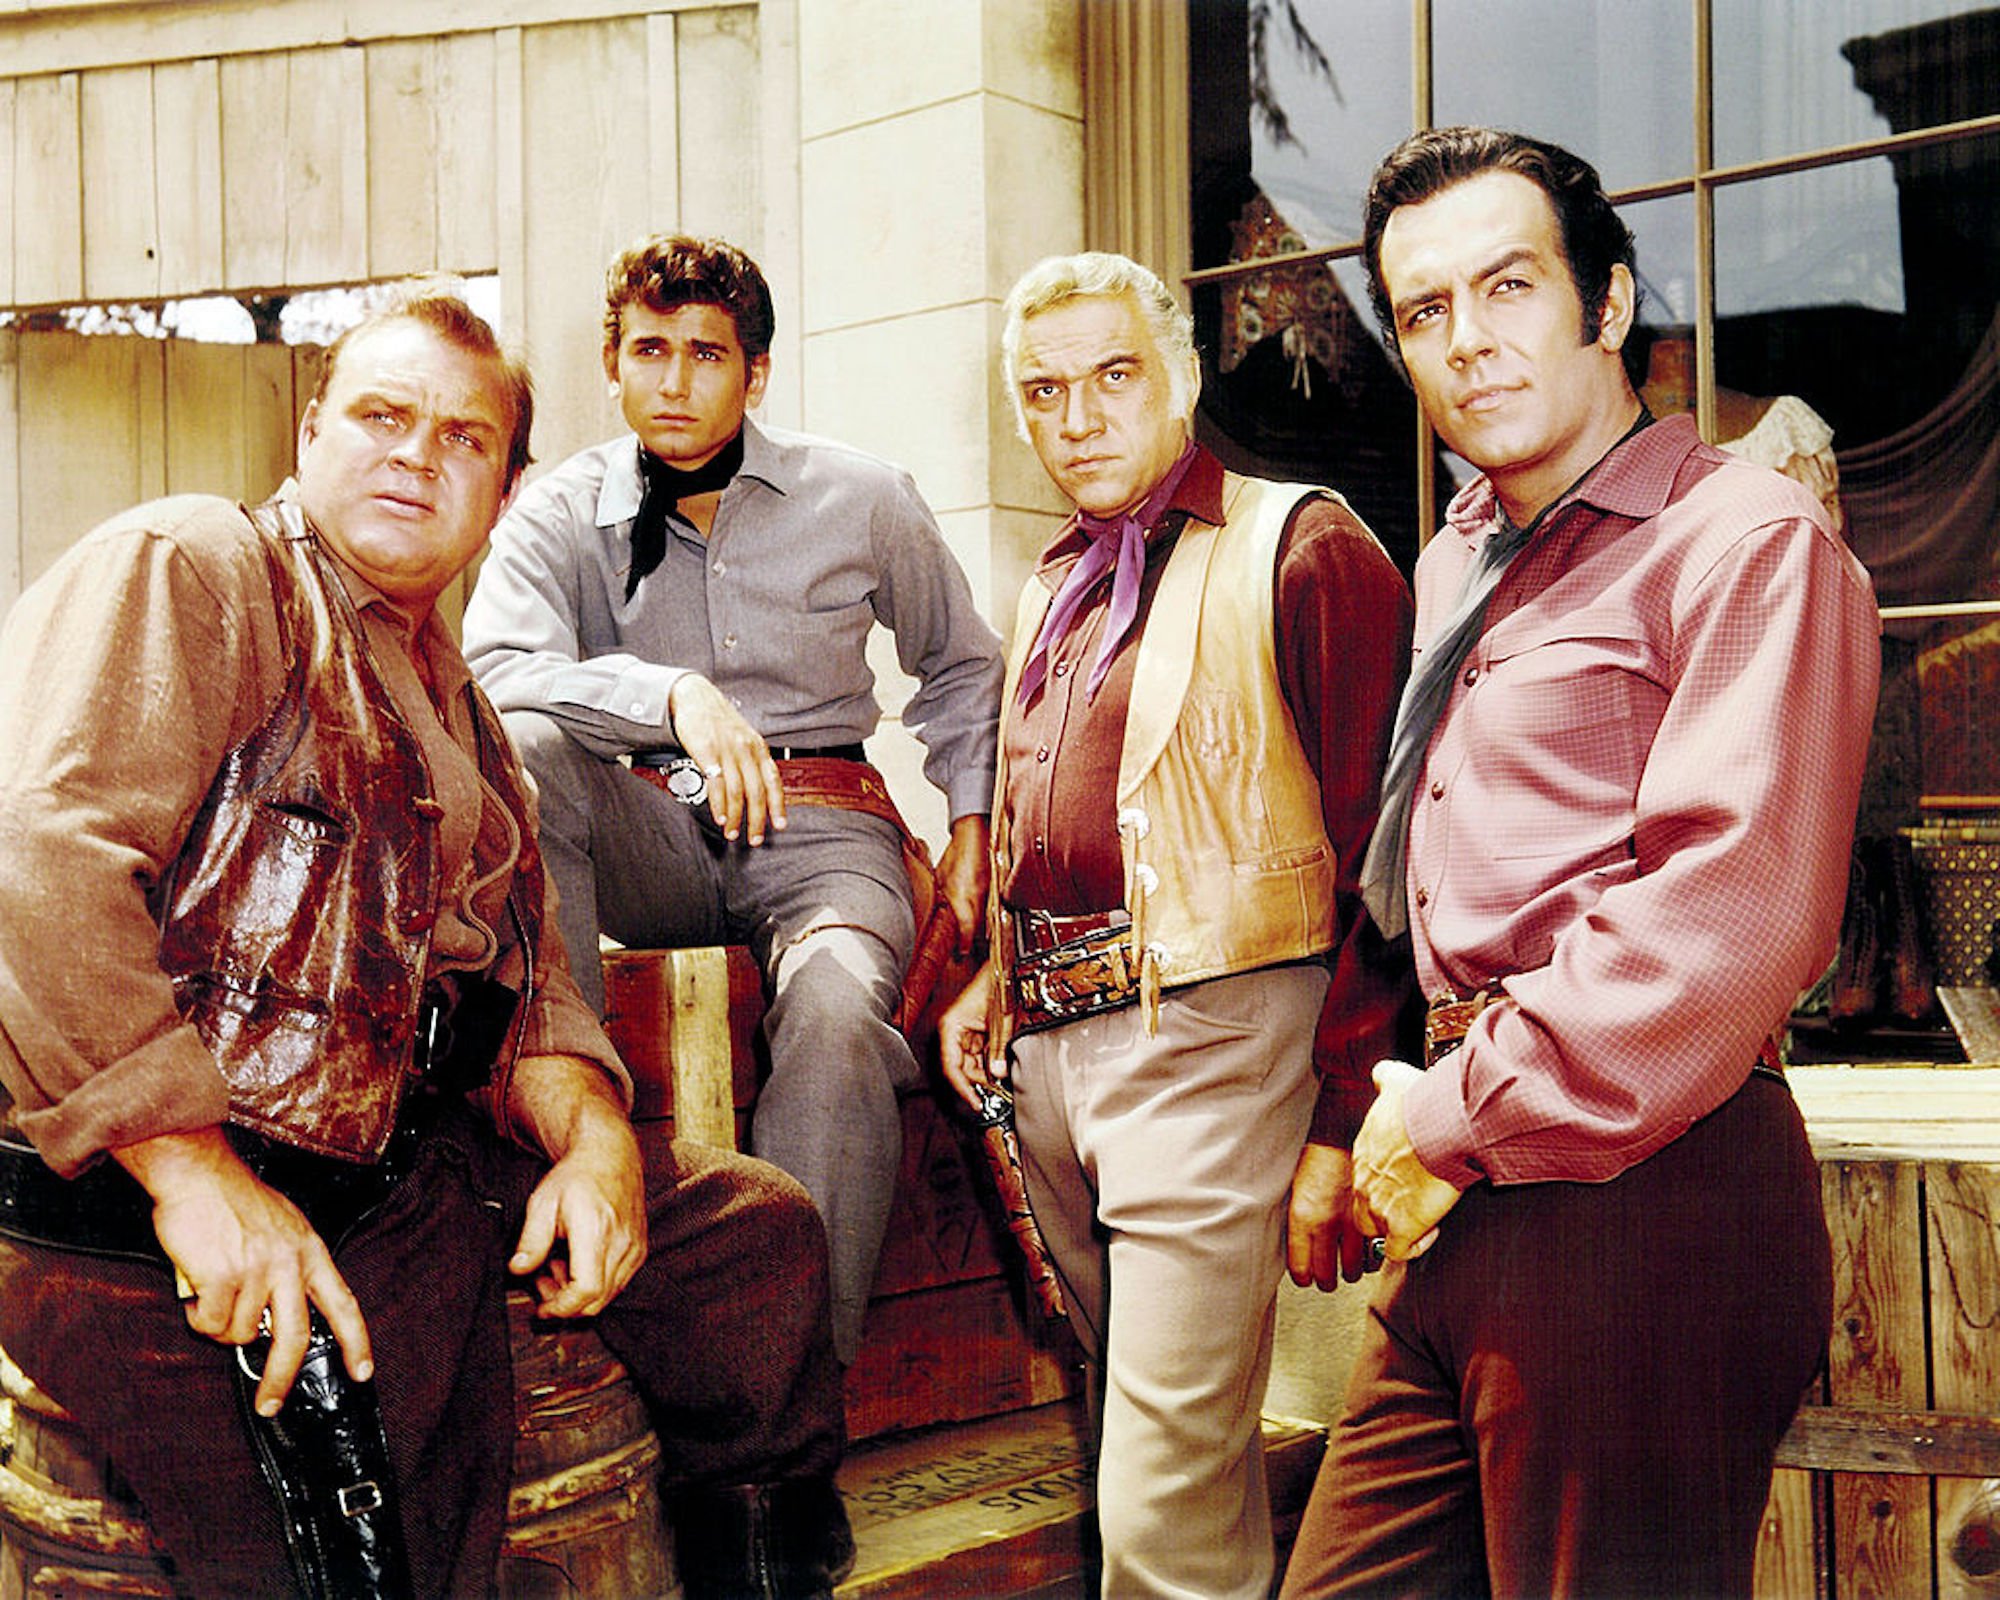 Members of the cast of the TV western series 'Bonanza'